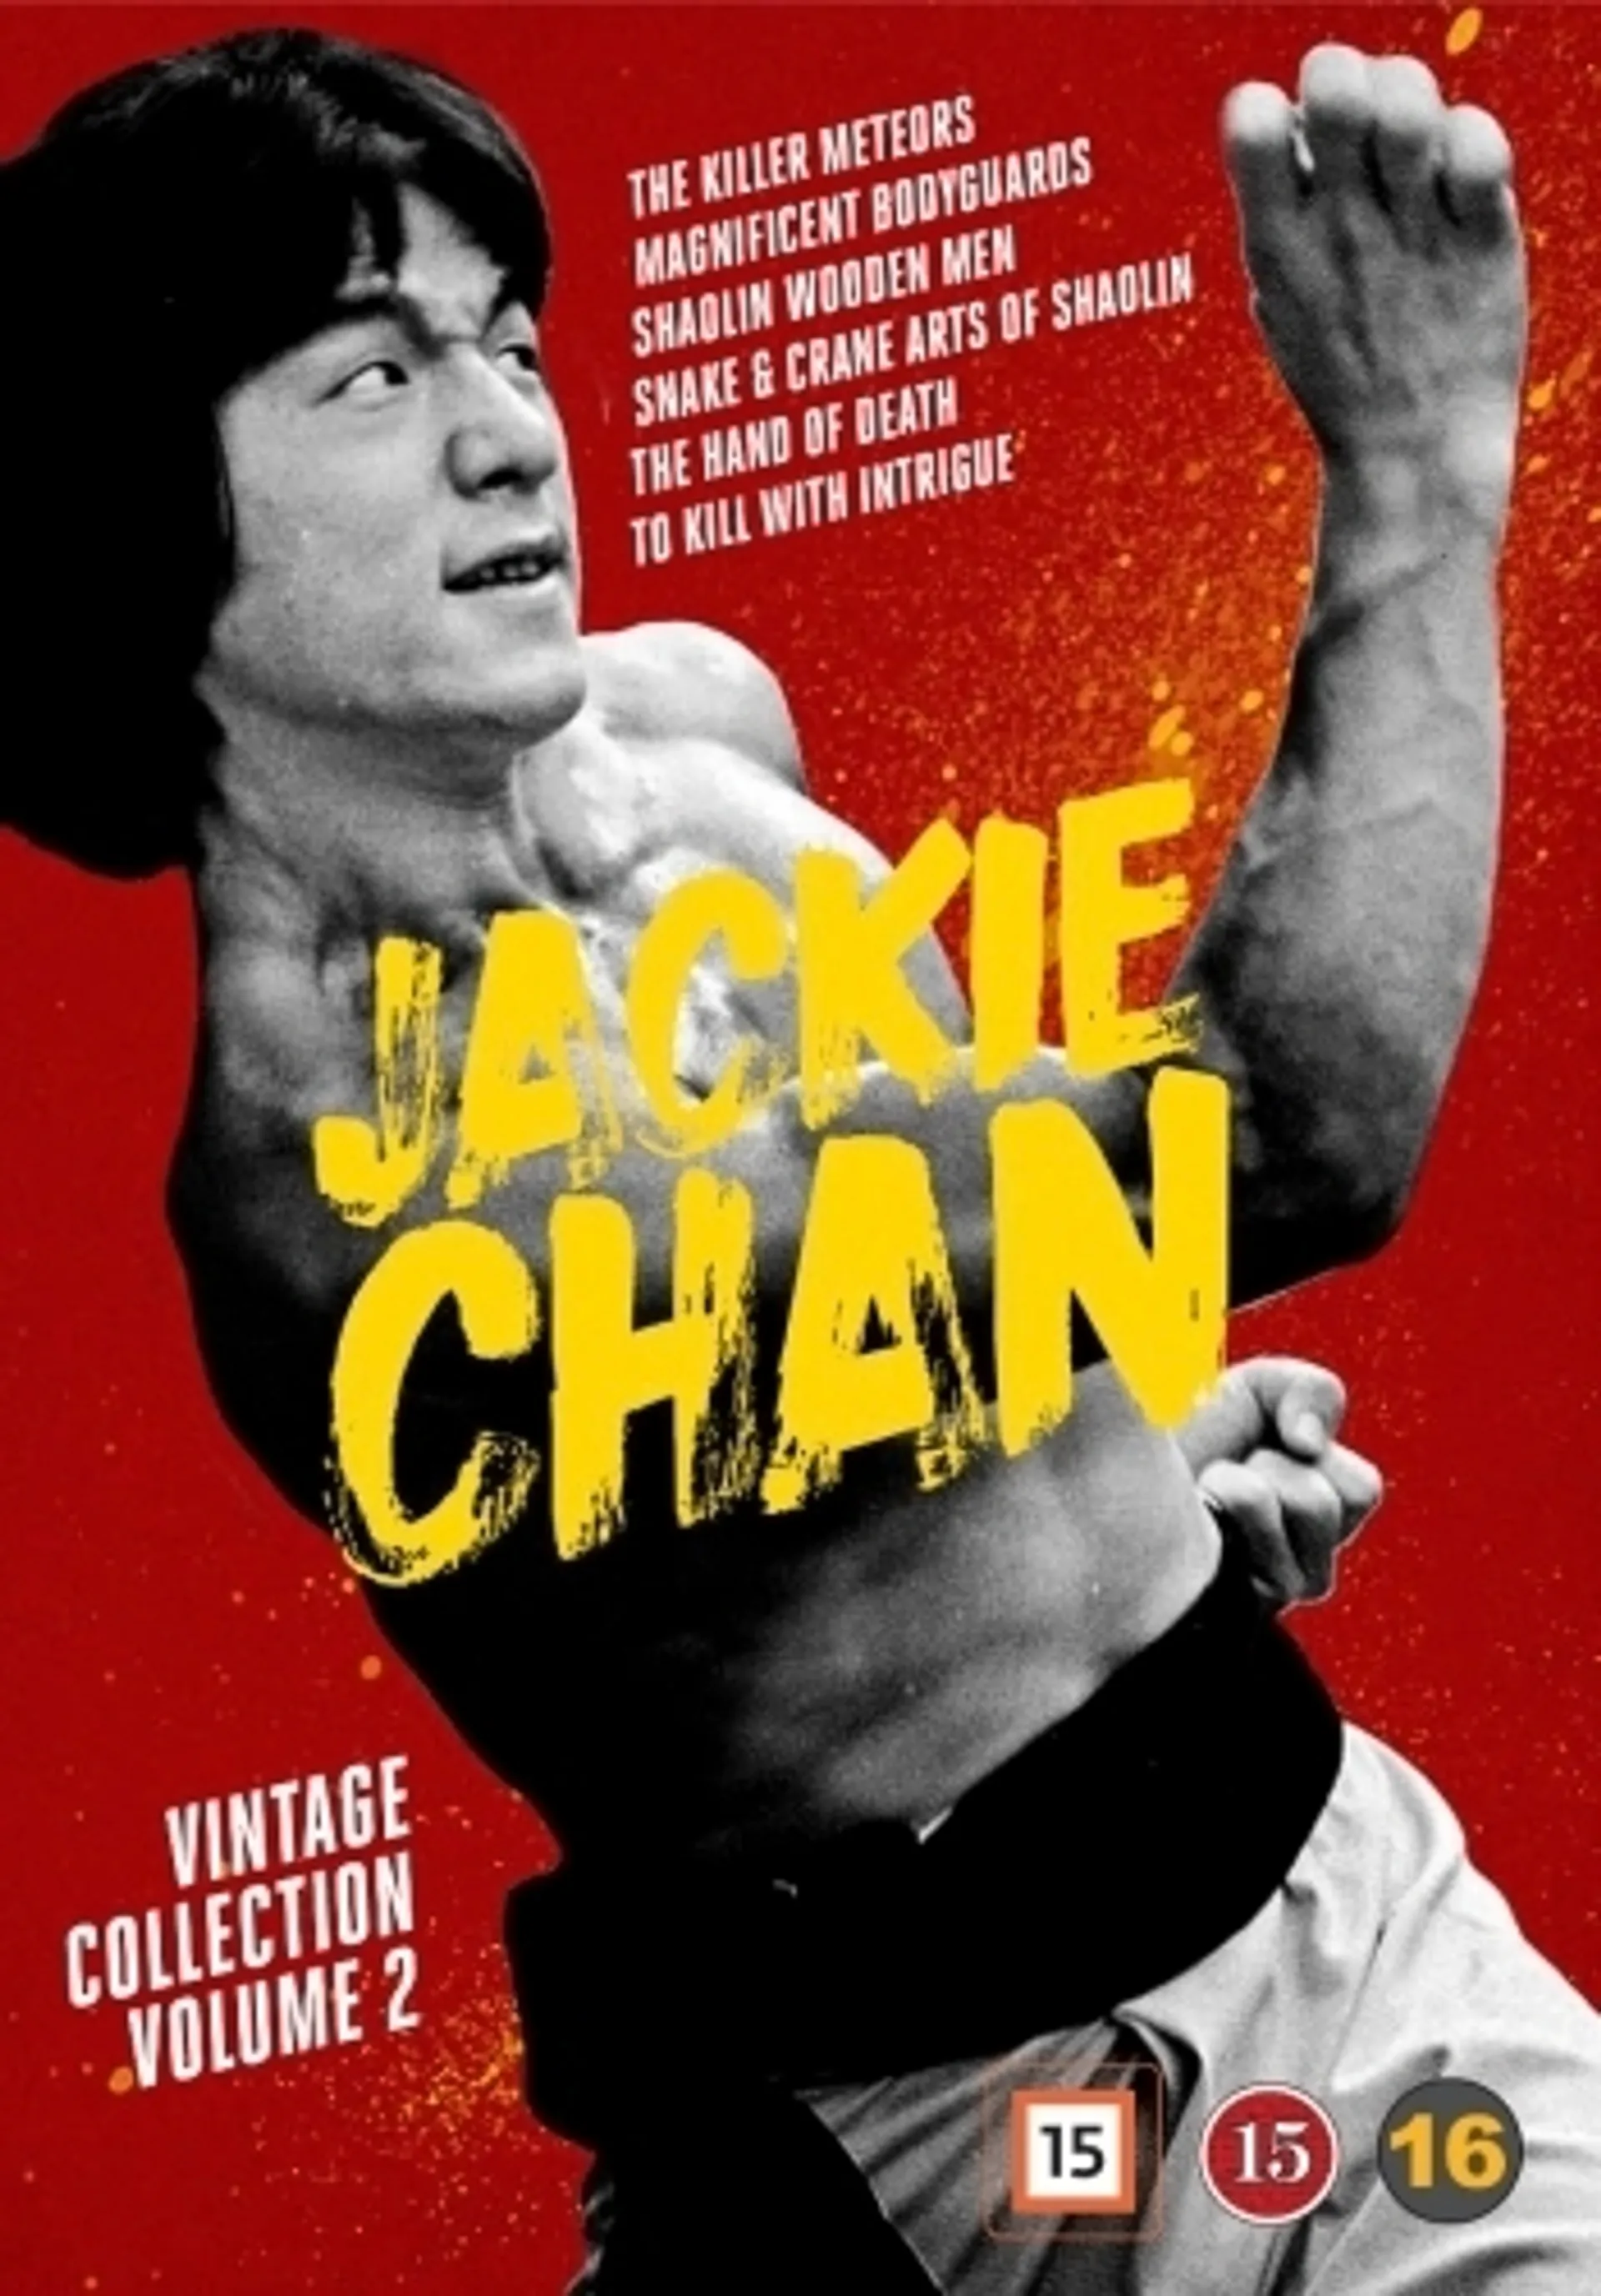 Jackie Chan: Vintage Collection 2 Blu-ray